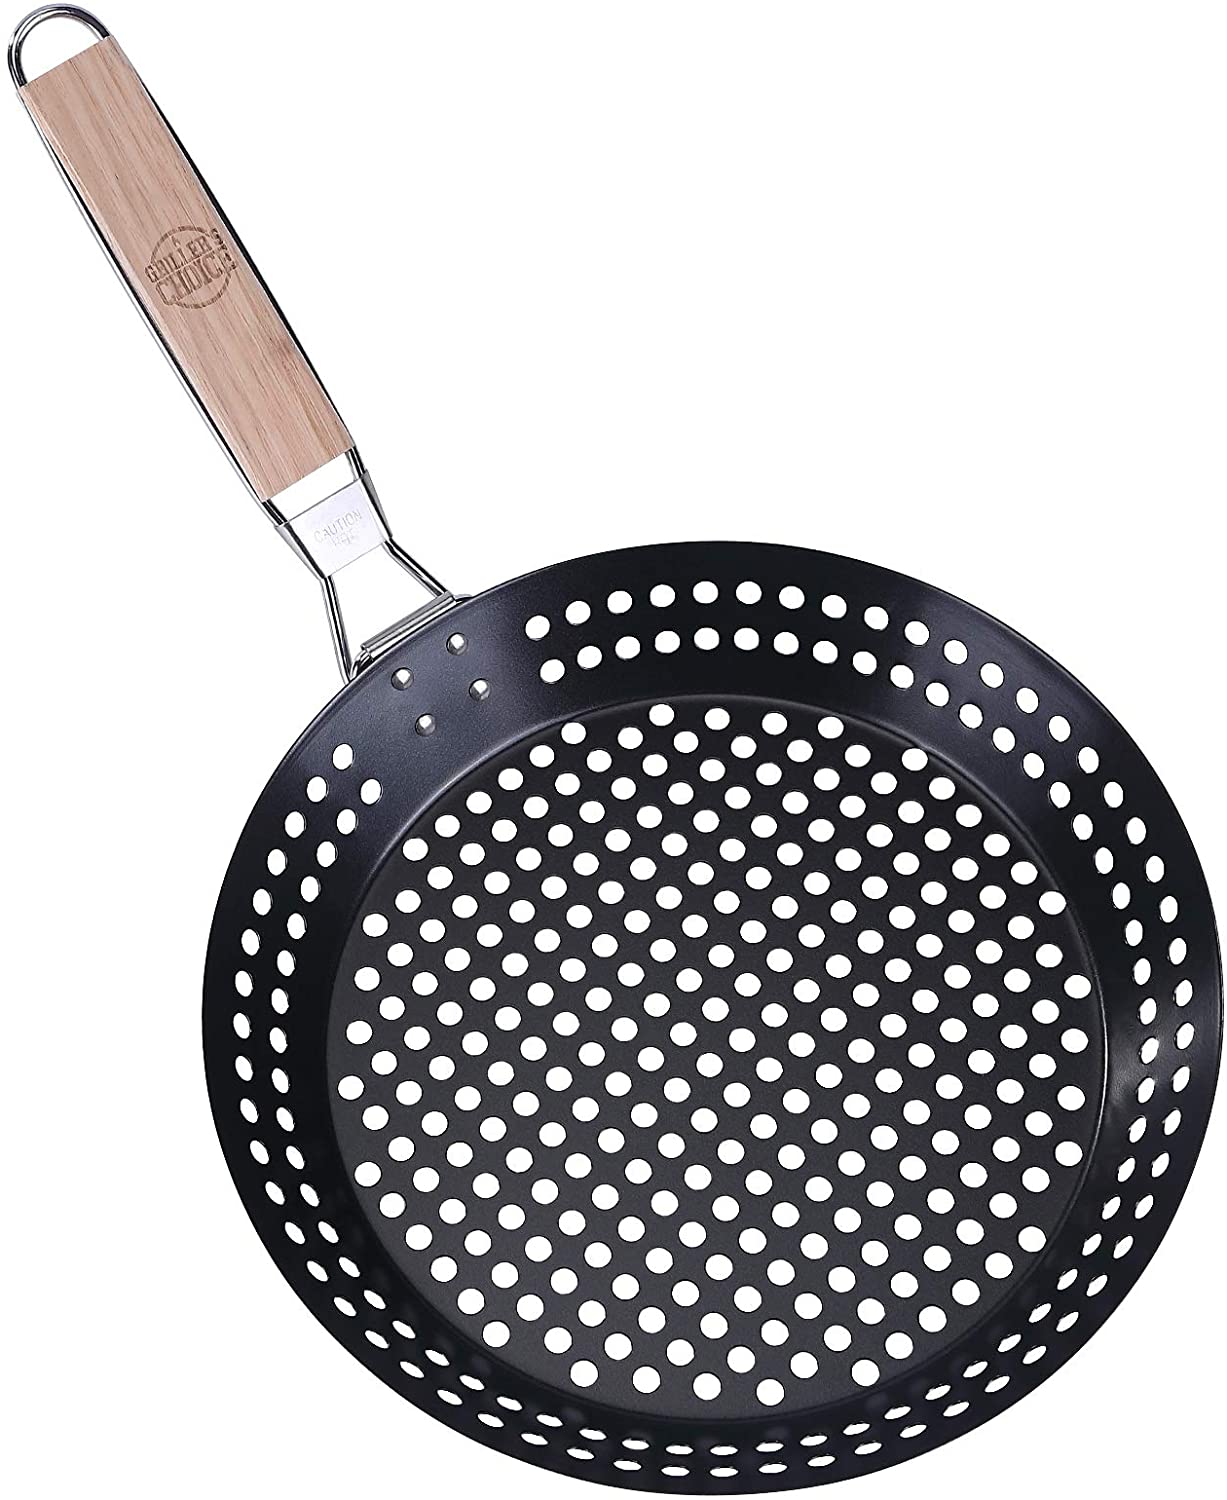 grillers choice, griddle accessory set, blackstone, griddle set, griddle spatula, griddle cleaning kit, griddle tools, flat top grill, flat top griddle set, bench scraper, griddle tools, grill tools, grill accessories, stainless steel spatula, blackstone accessories, blackstone set, hibachi, grilling utensils, BBQ tools, Blue Rhino